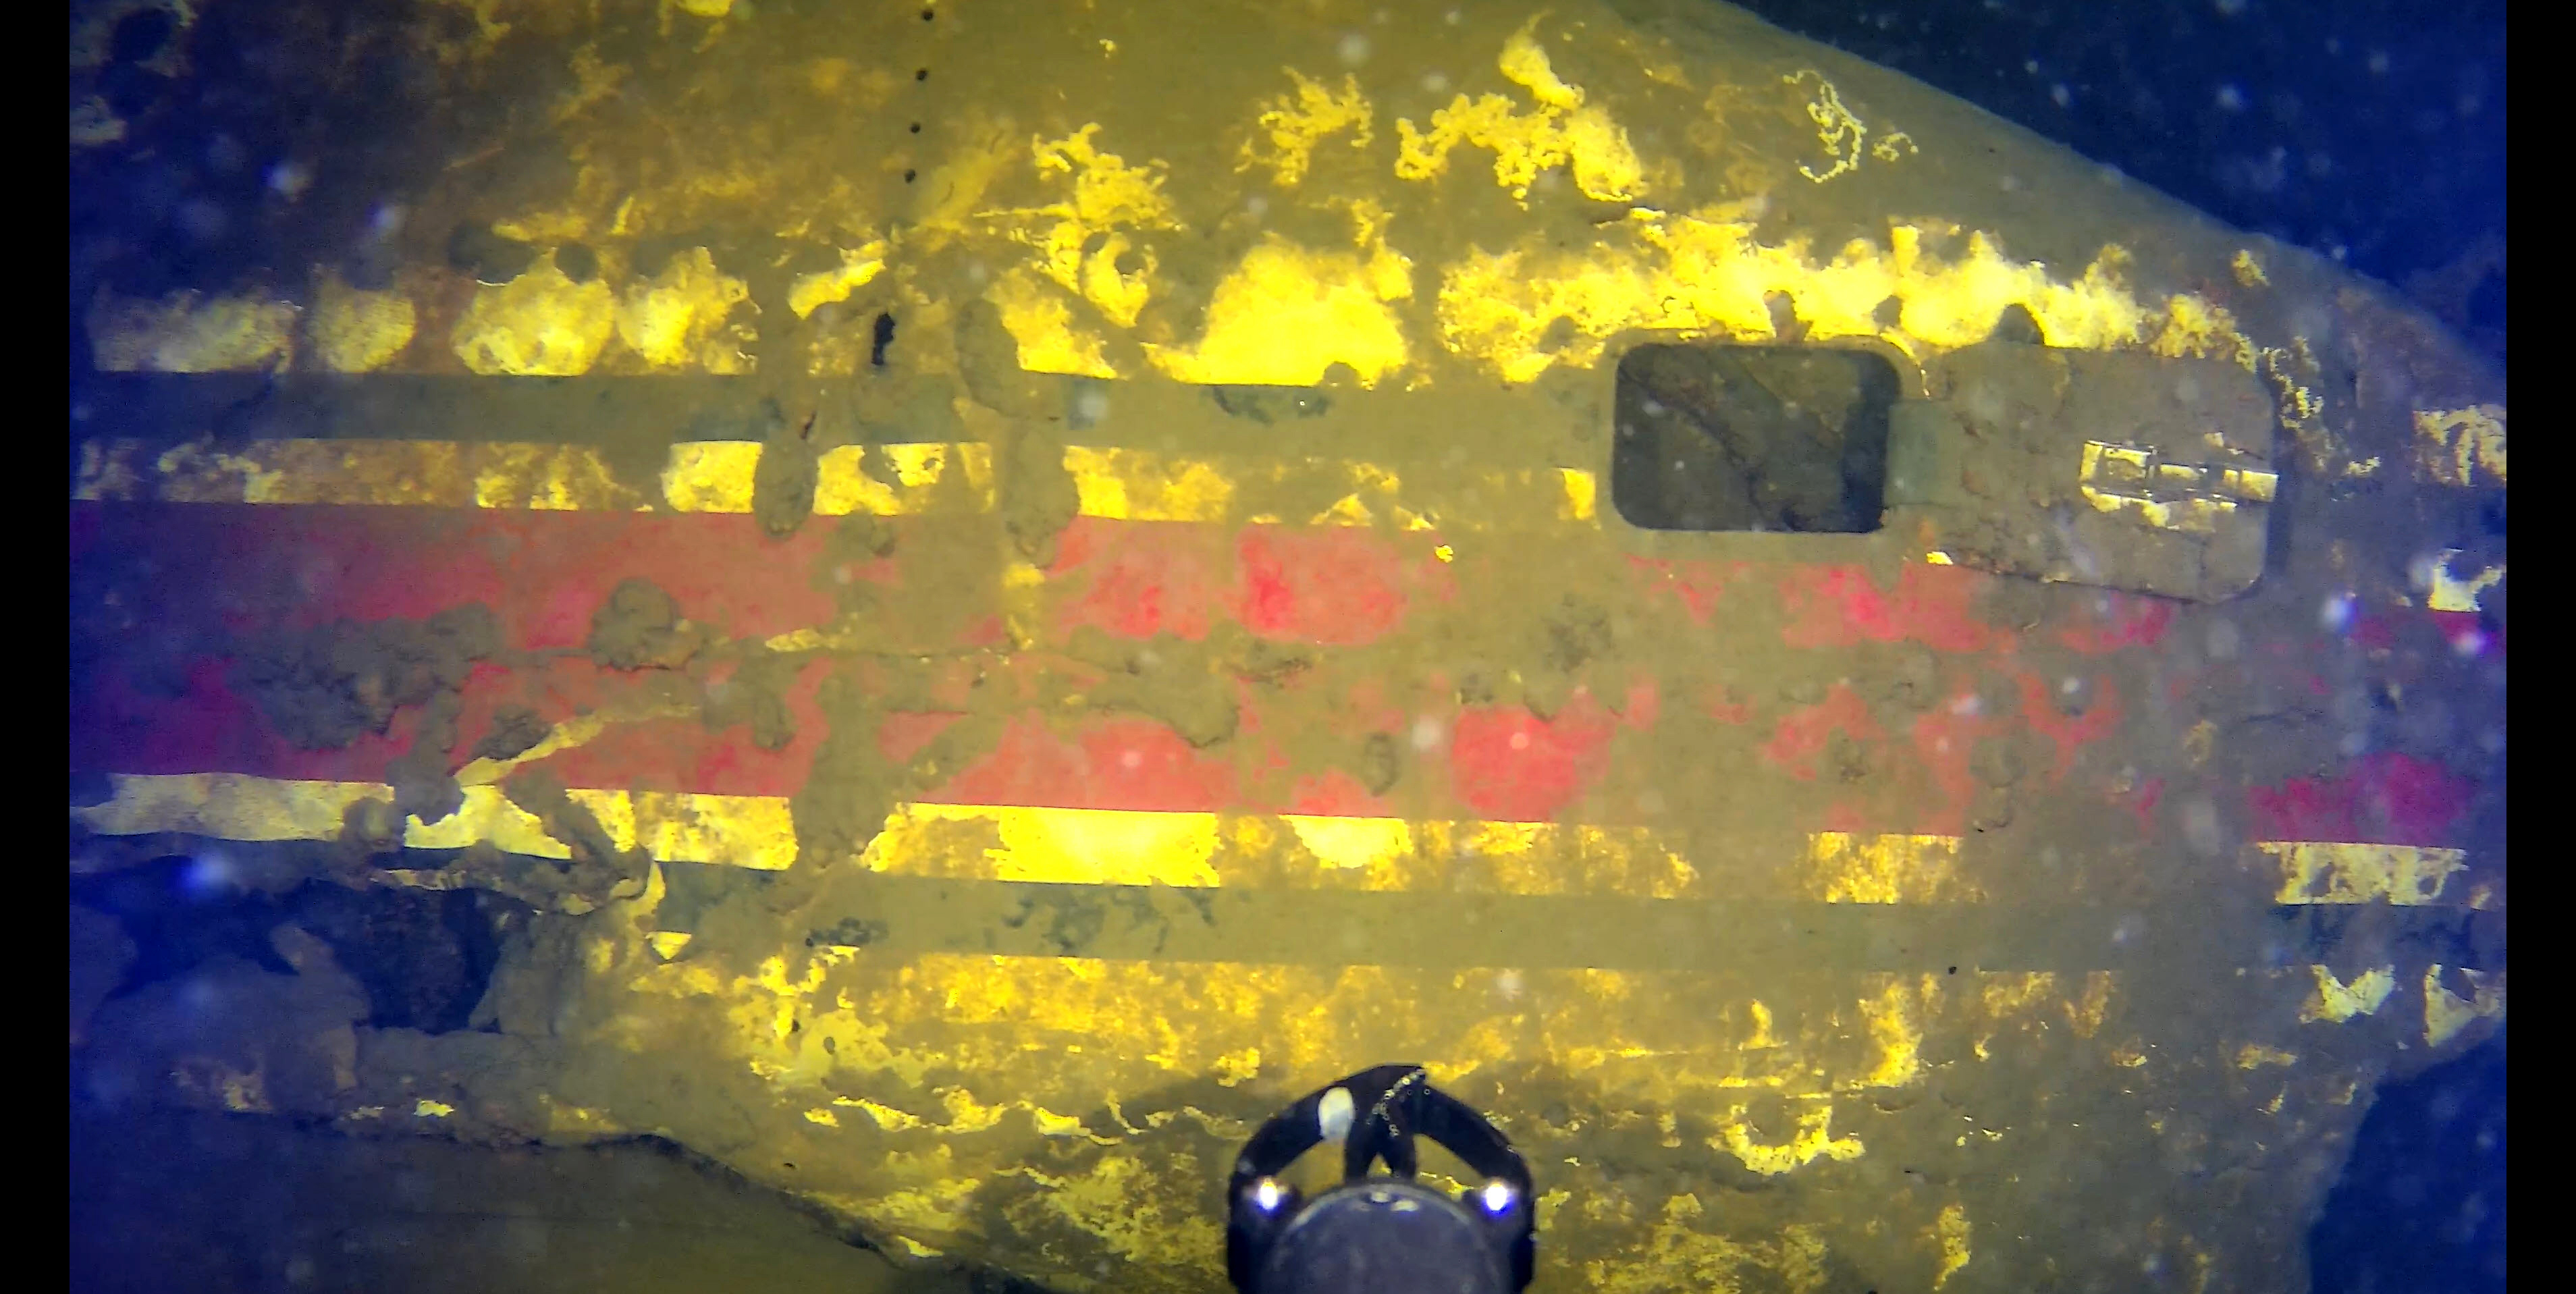 The side of plane wreckage in Lake Champlain identified by undersea search expert Garry Kozak as N400CP, a plane that crashed in January 1971 after taking off from Burlington, Vermont.